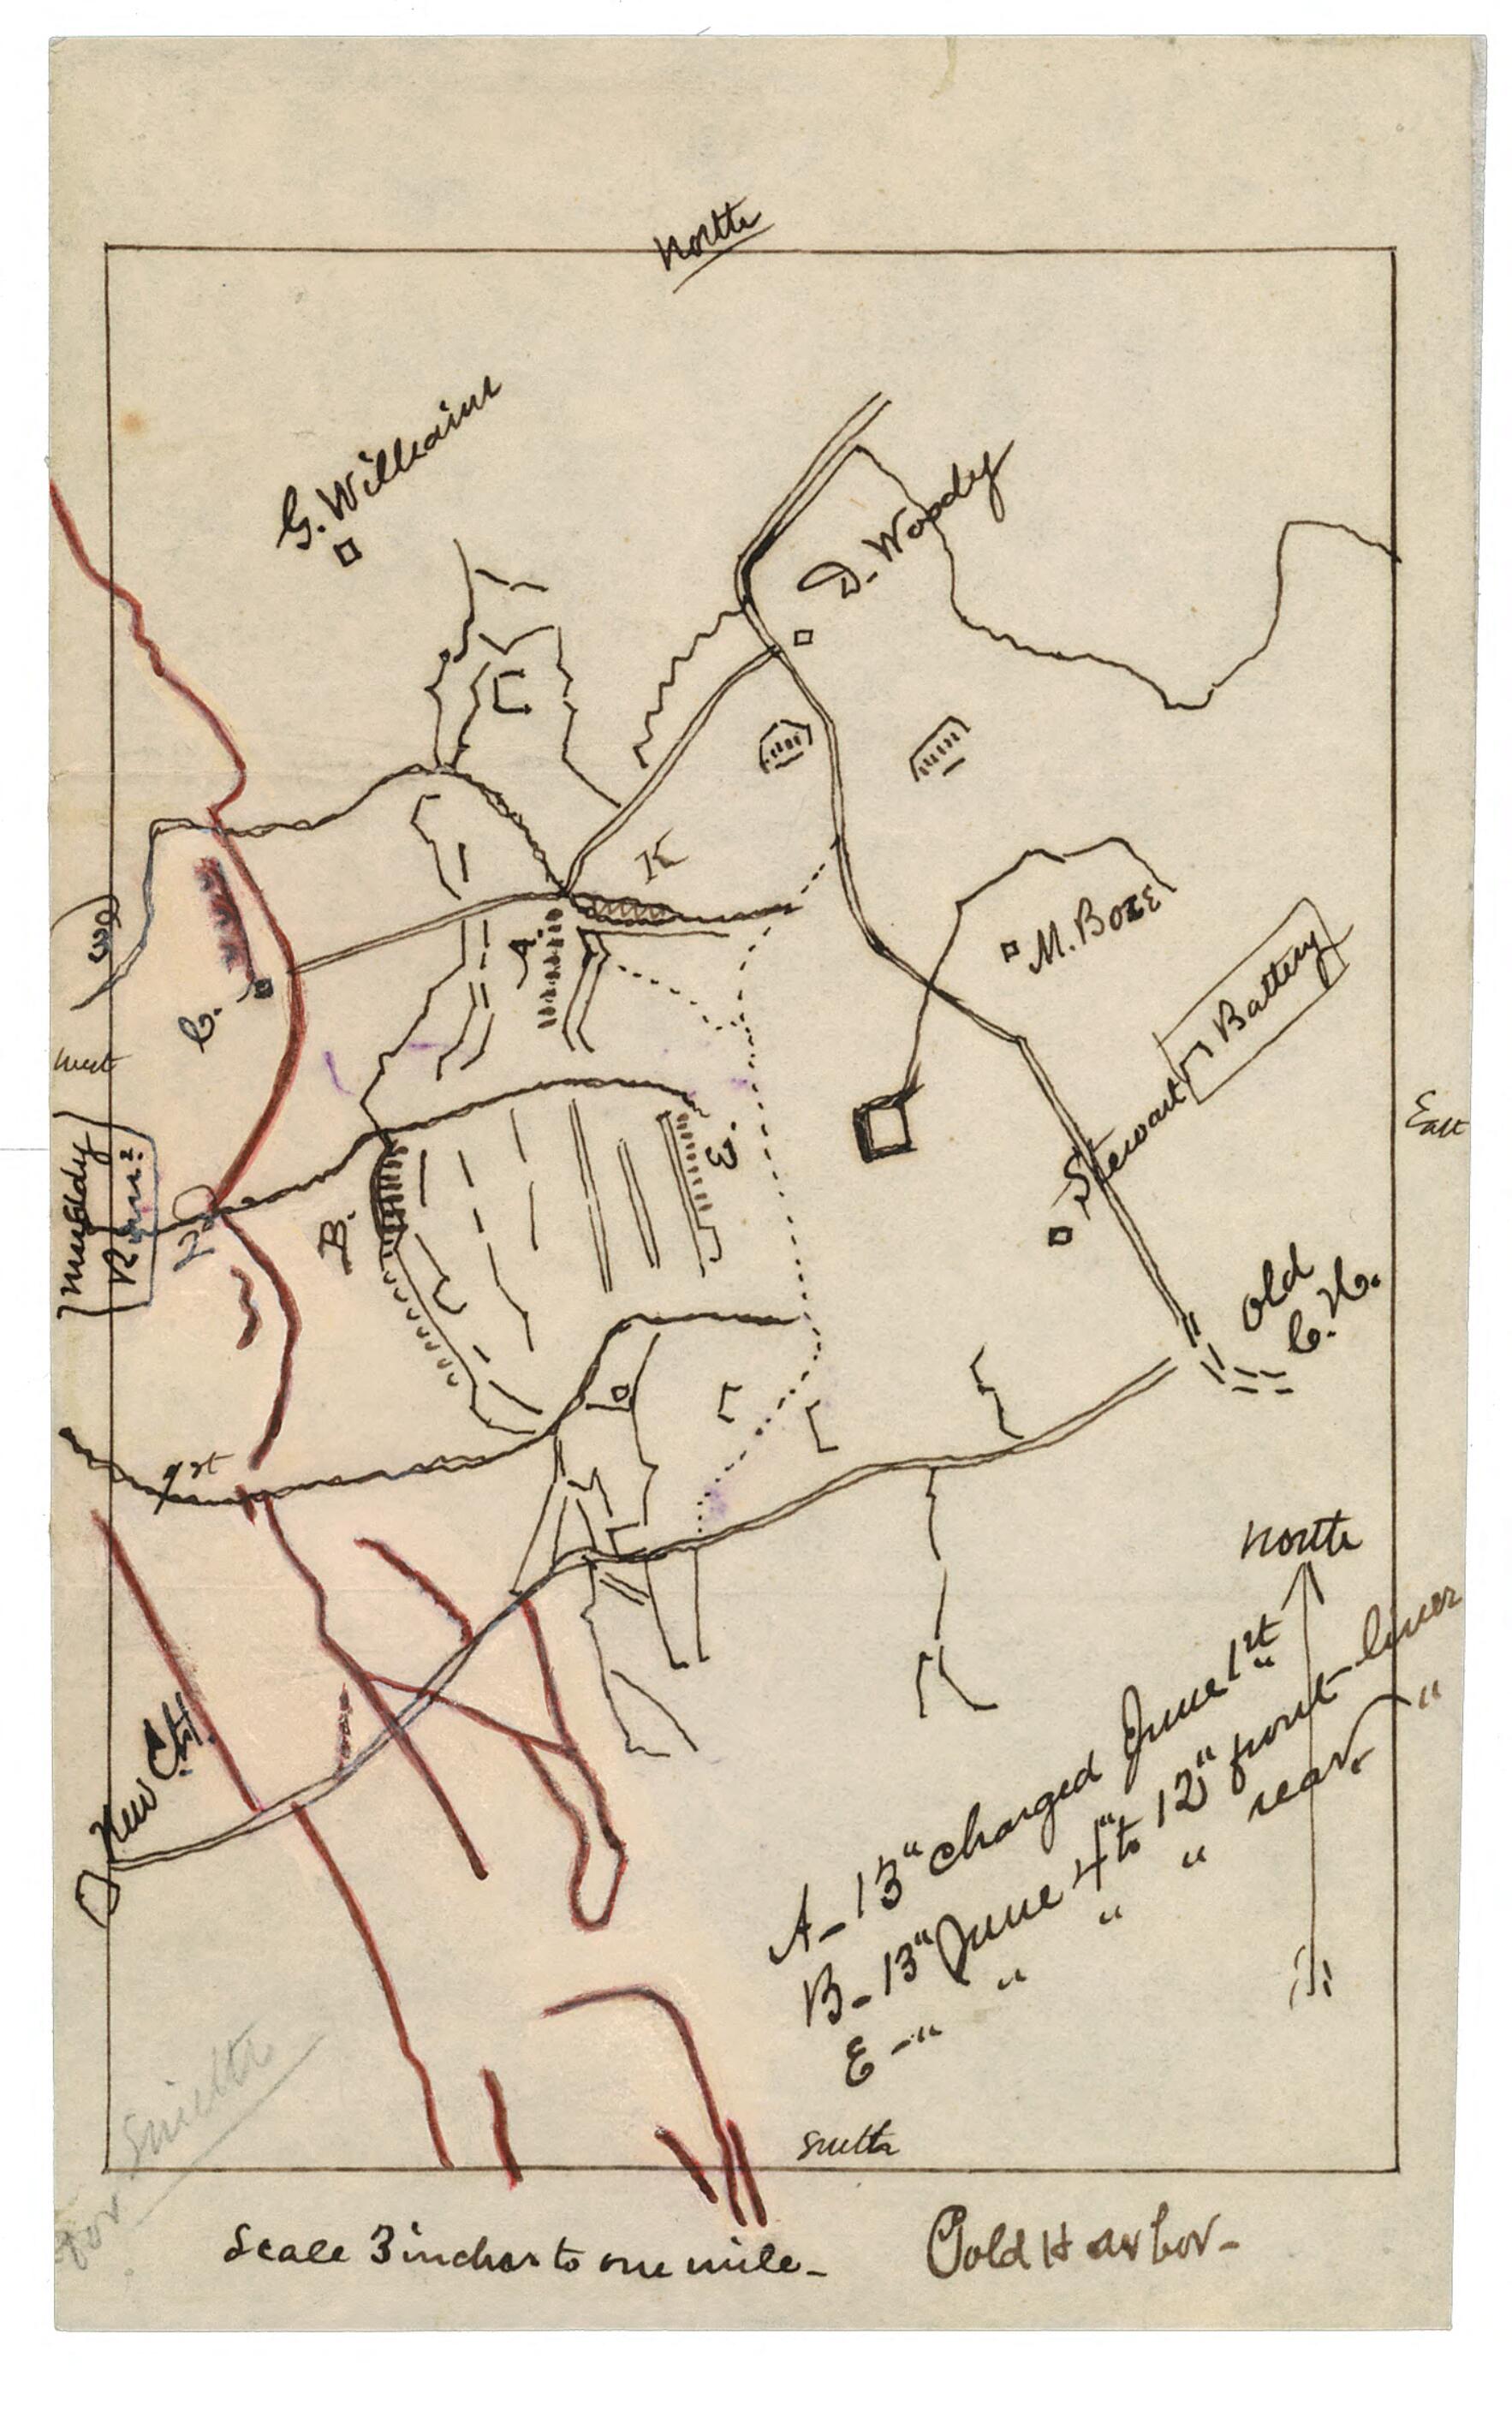 This old map of Cold Harbor Hanover County, Virginia from 1800 was created by Normand Smith in 1800